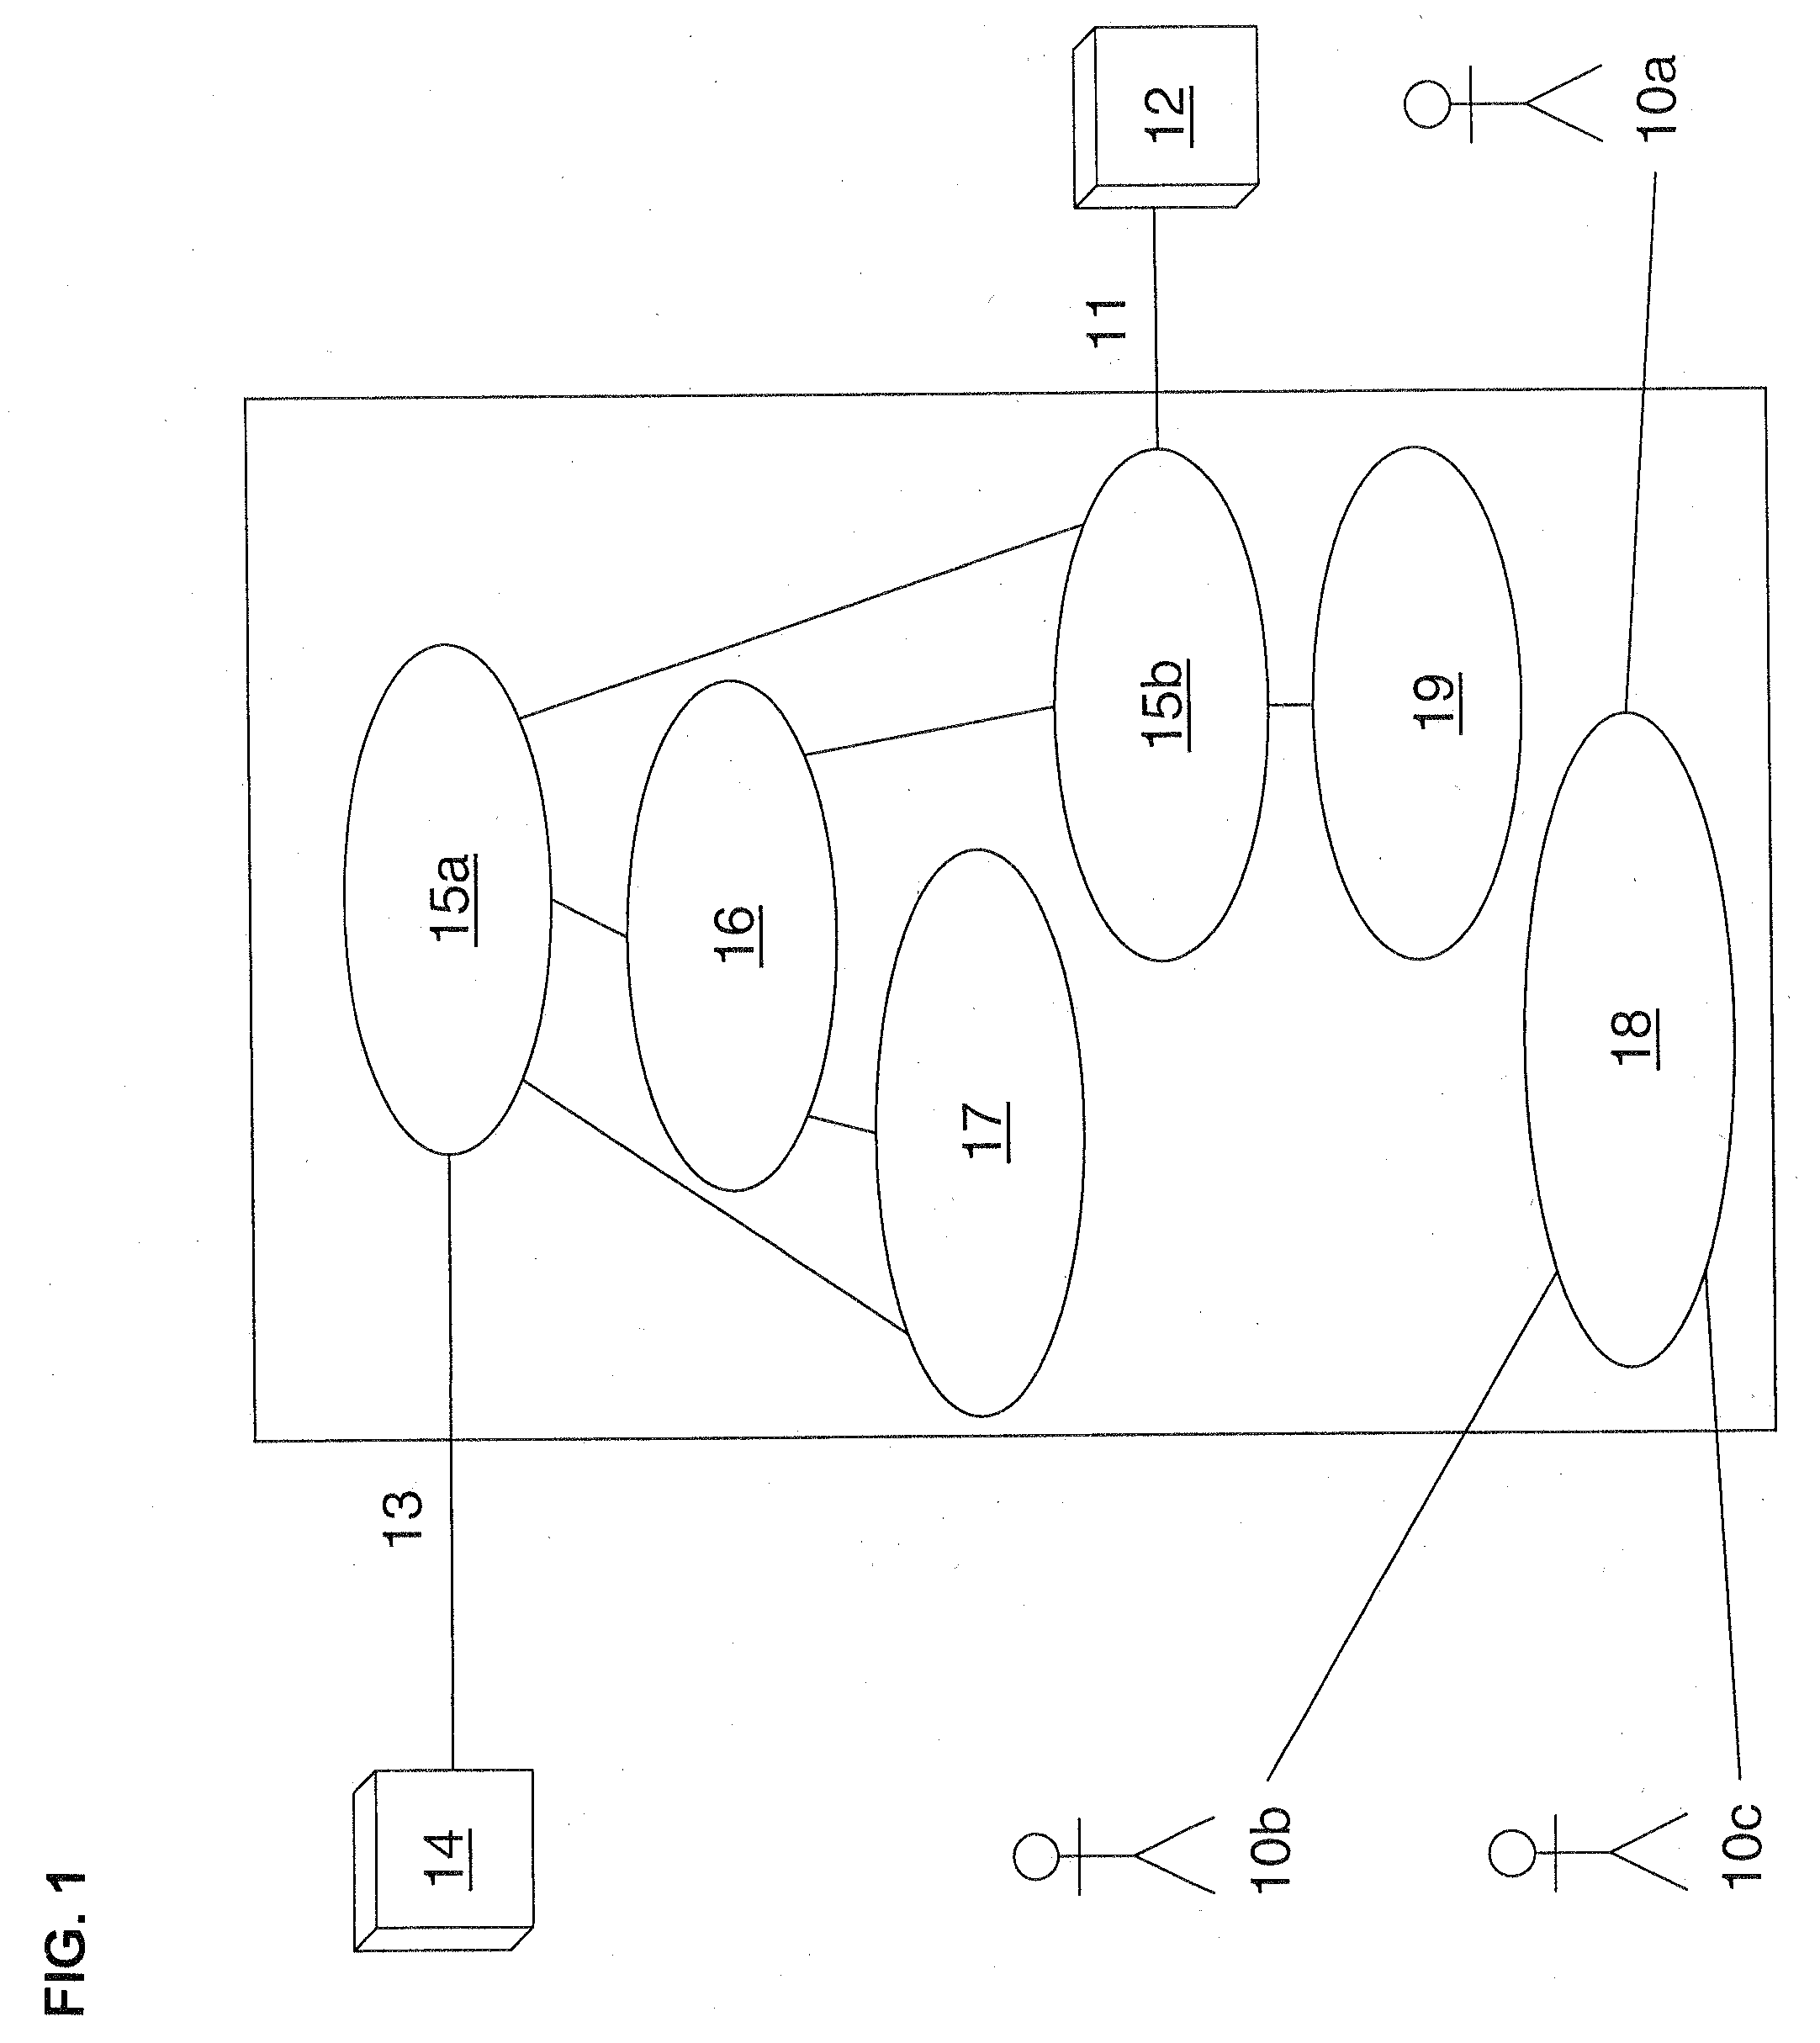 Interface between a production management system and an automation system